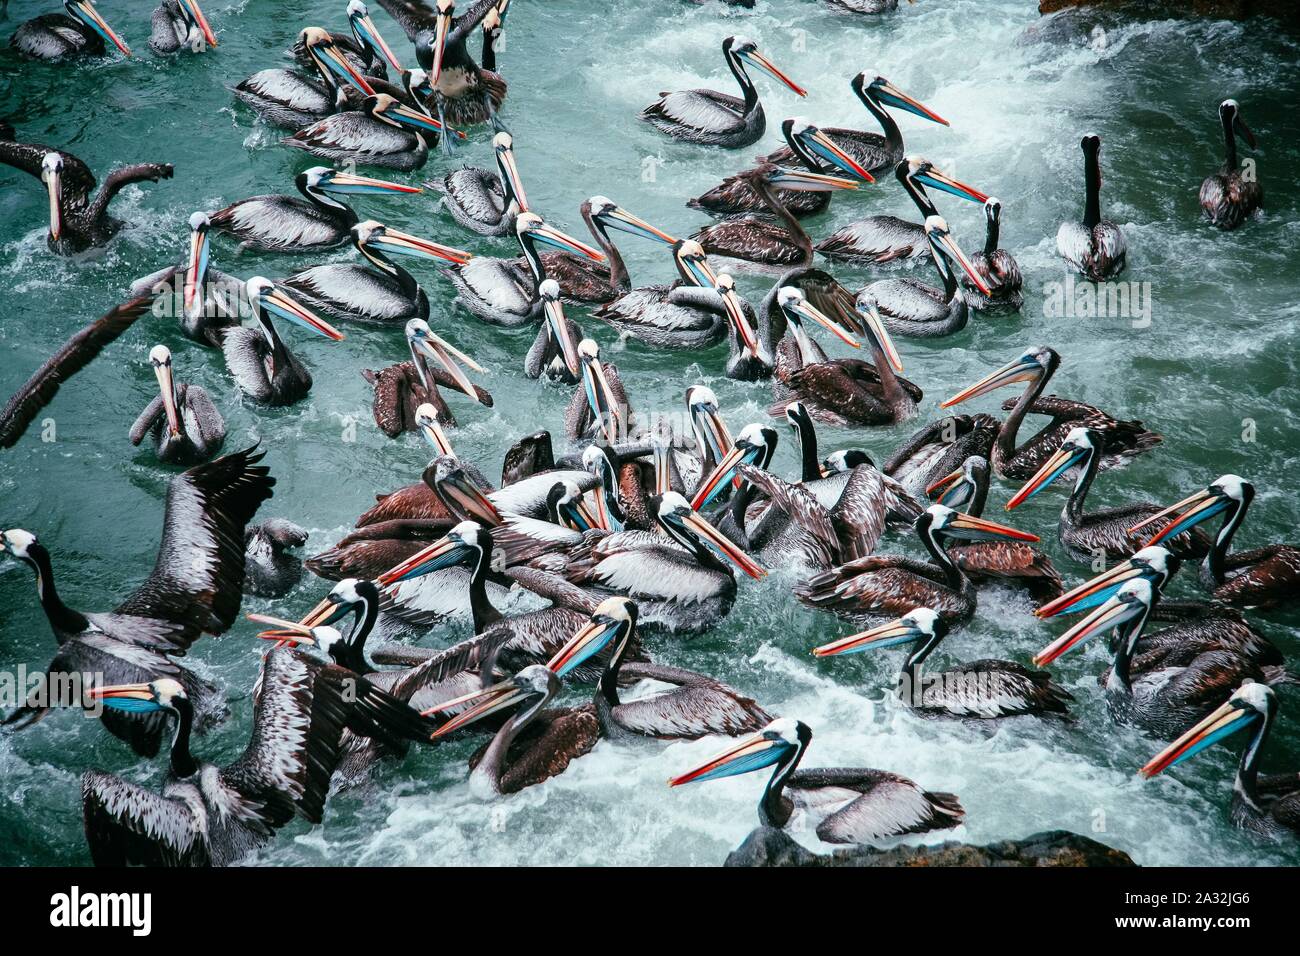 A large group of pelicans in the Pacific Ocean at the coast of Chile Stock Photo